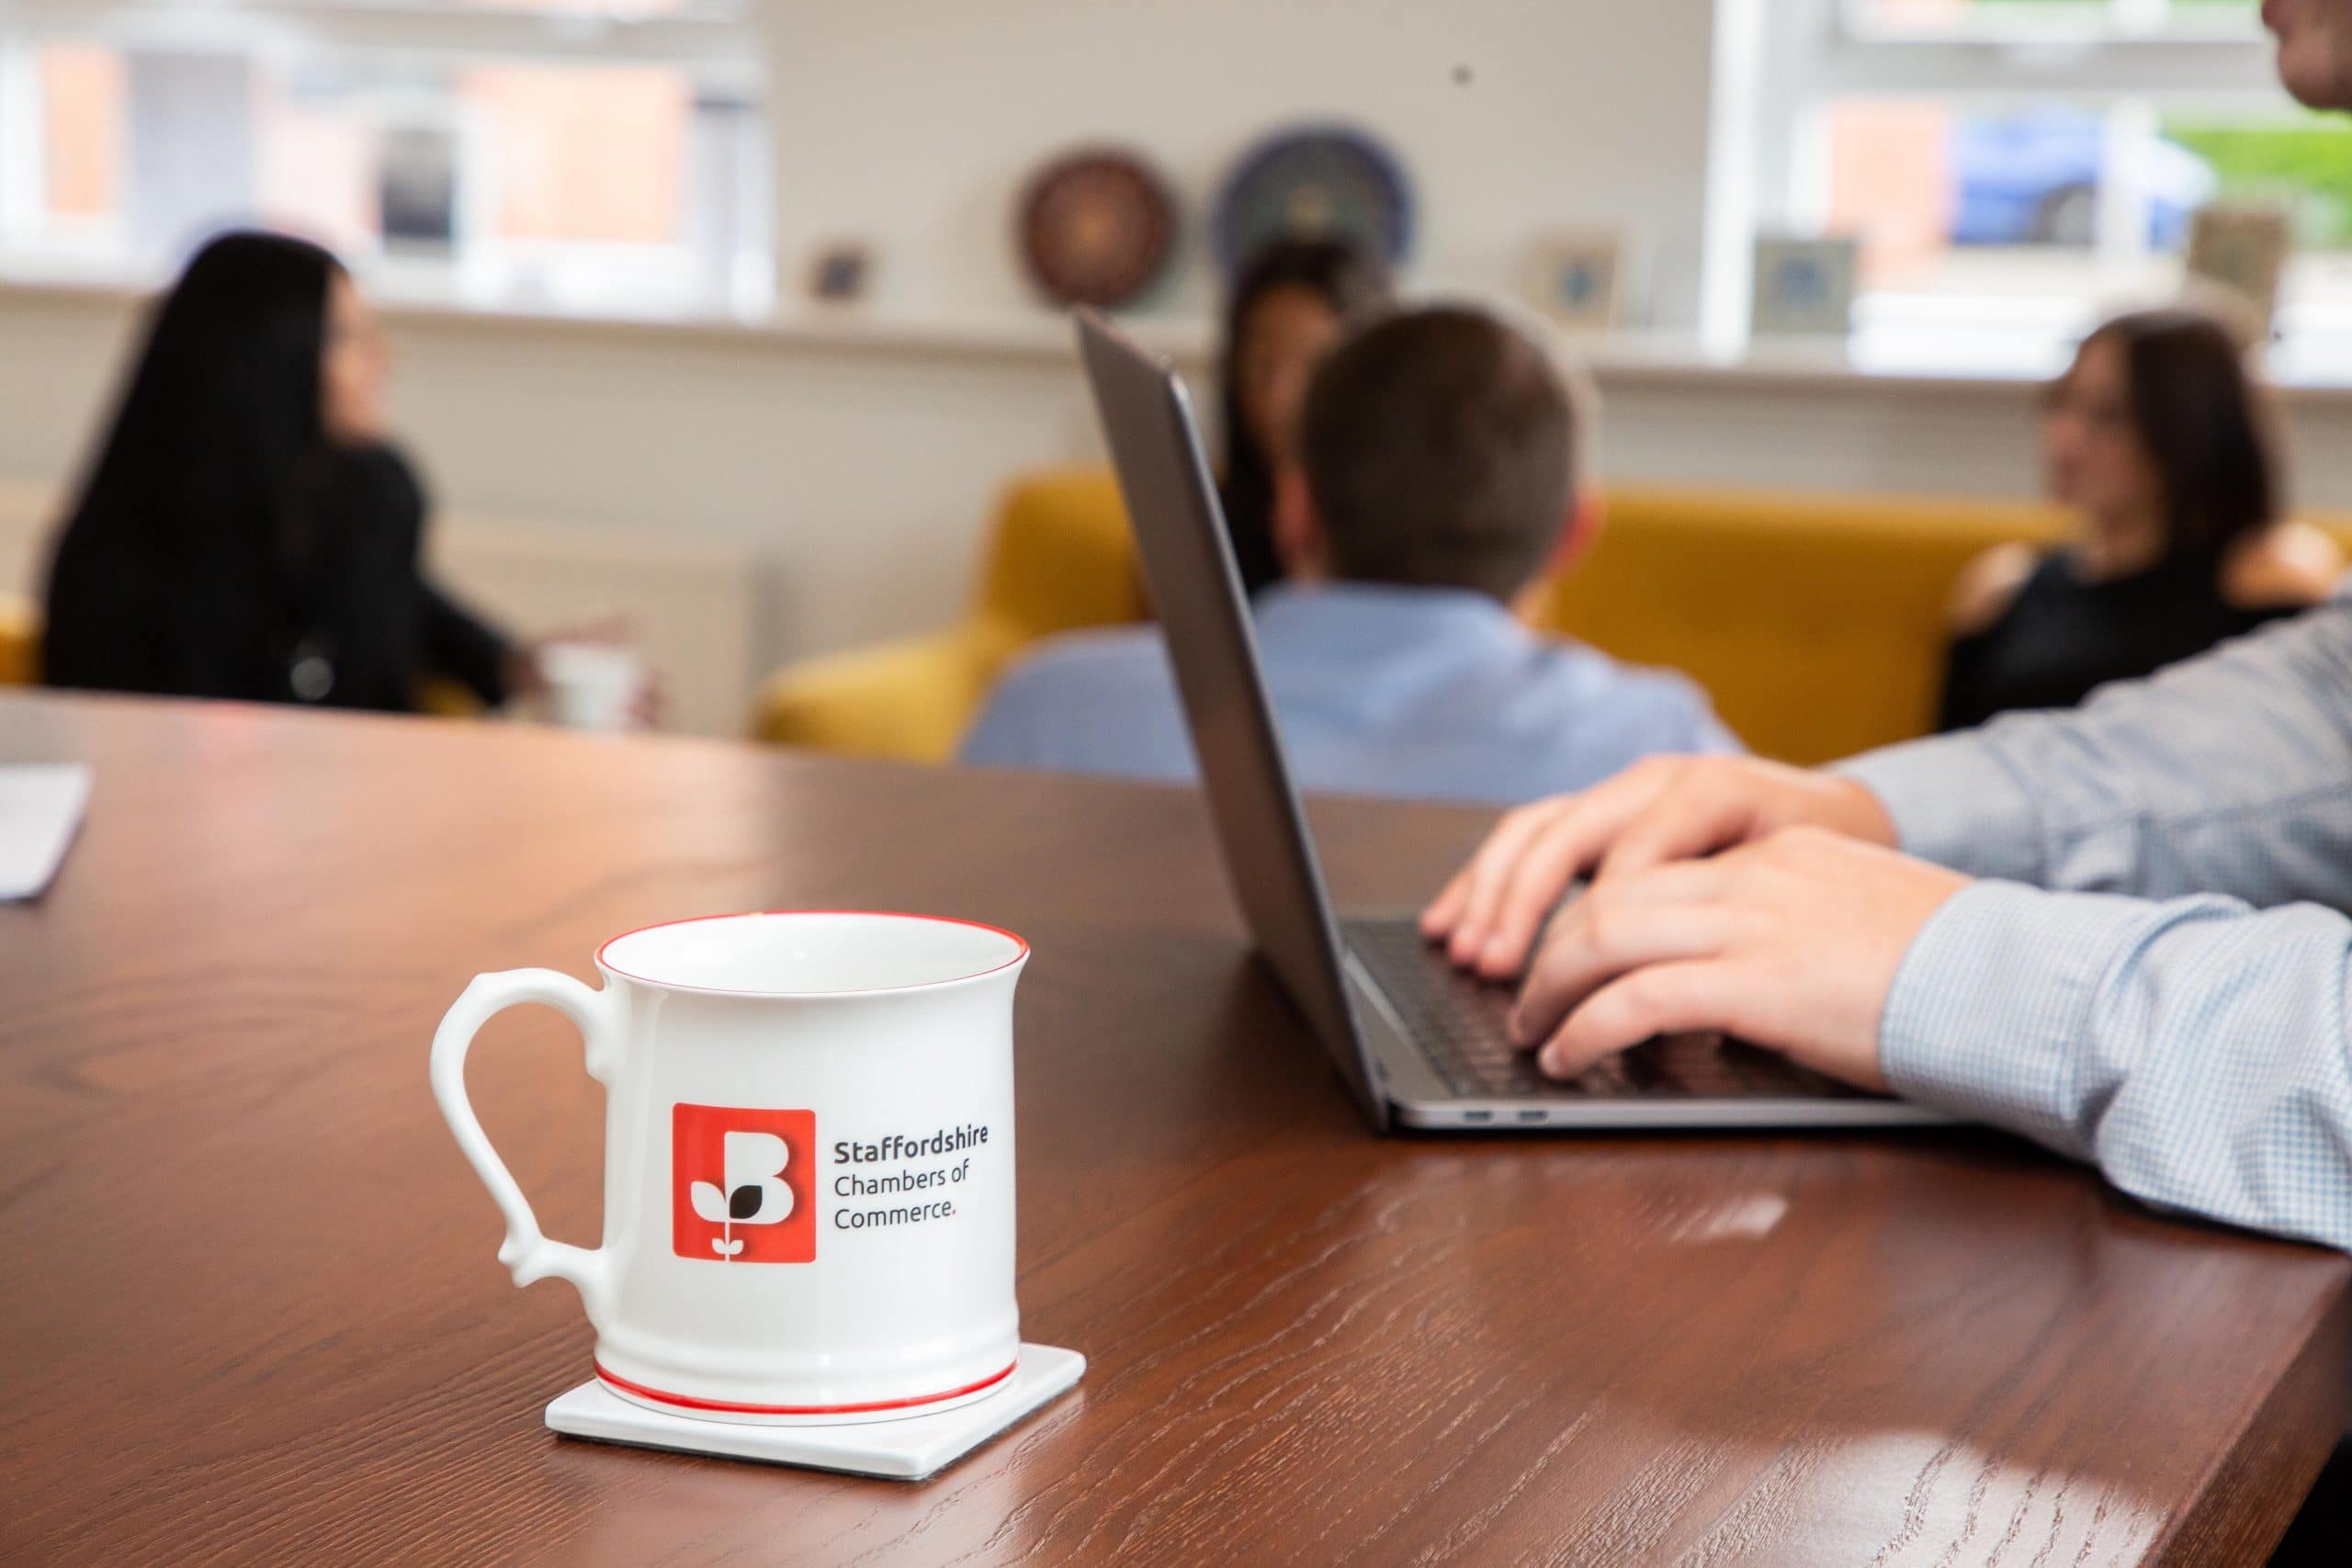 Staffordshire Chambers' Logo on a mug on a table next to a man working on his laptop